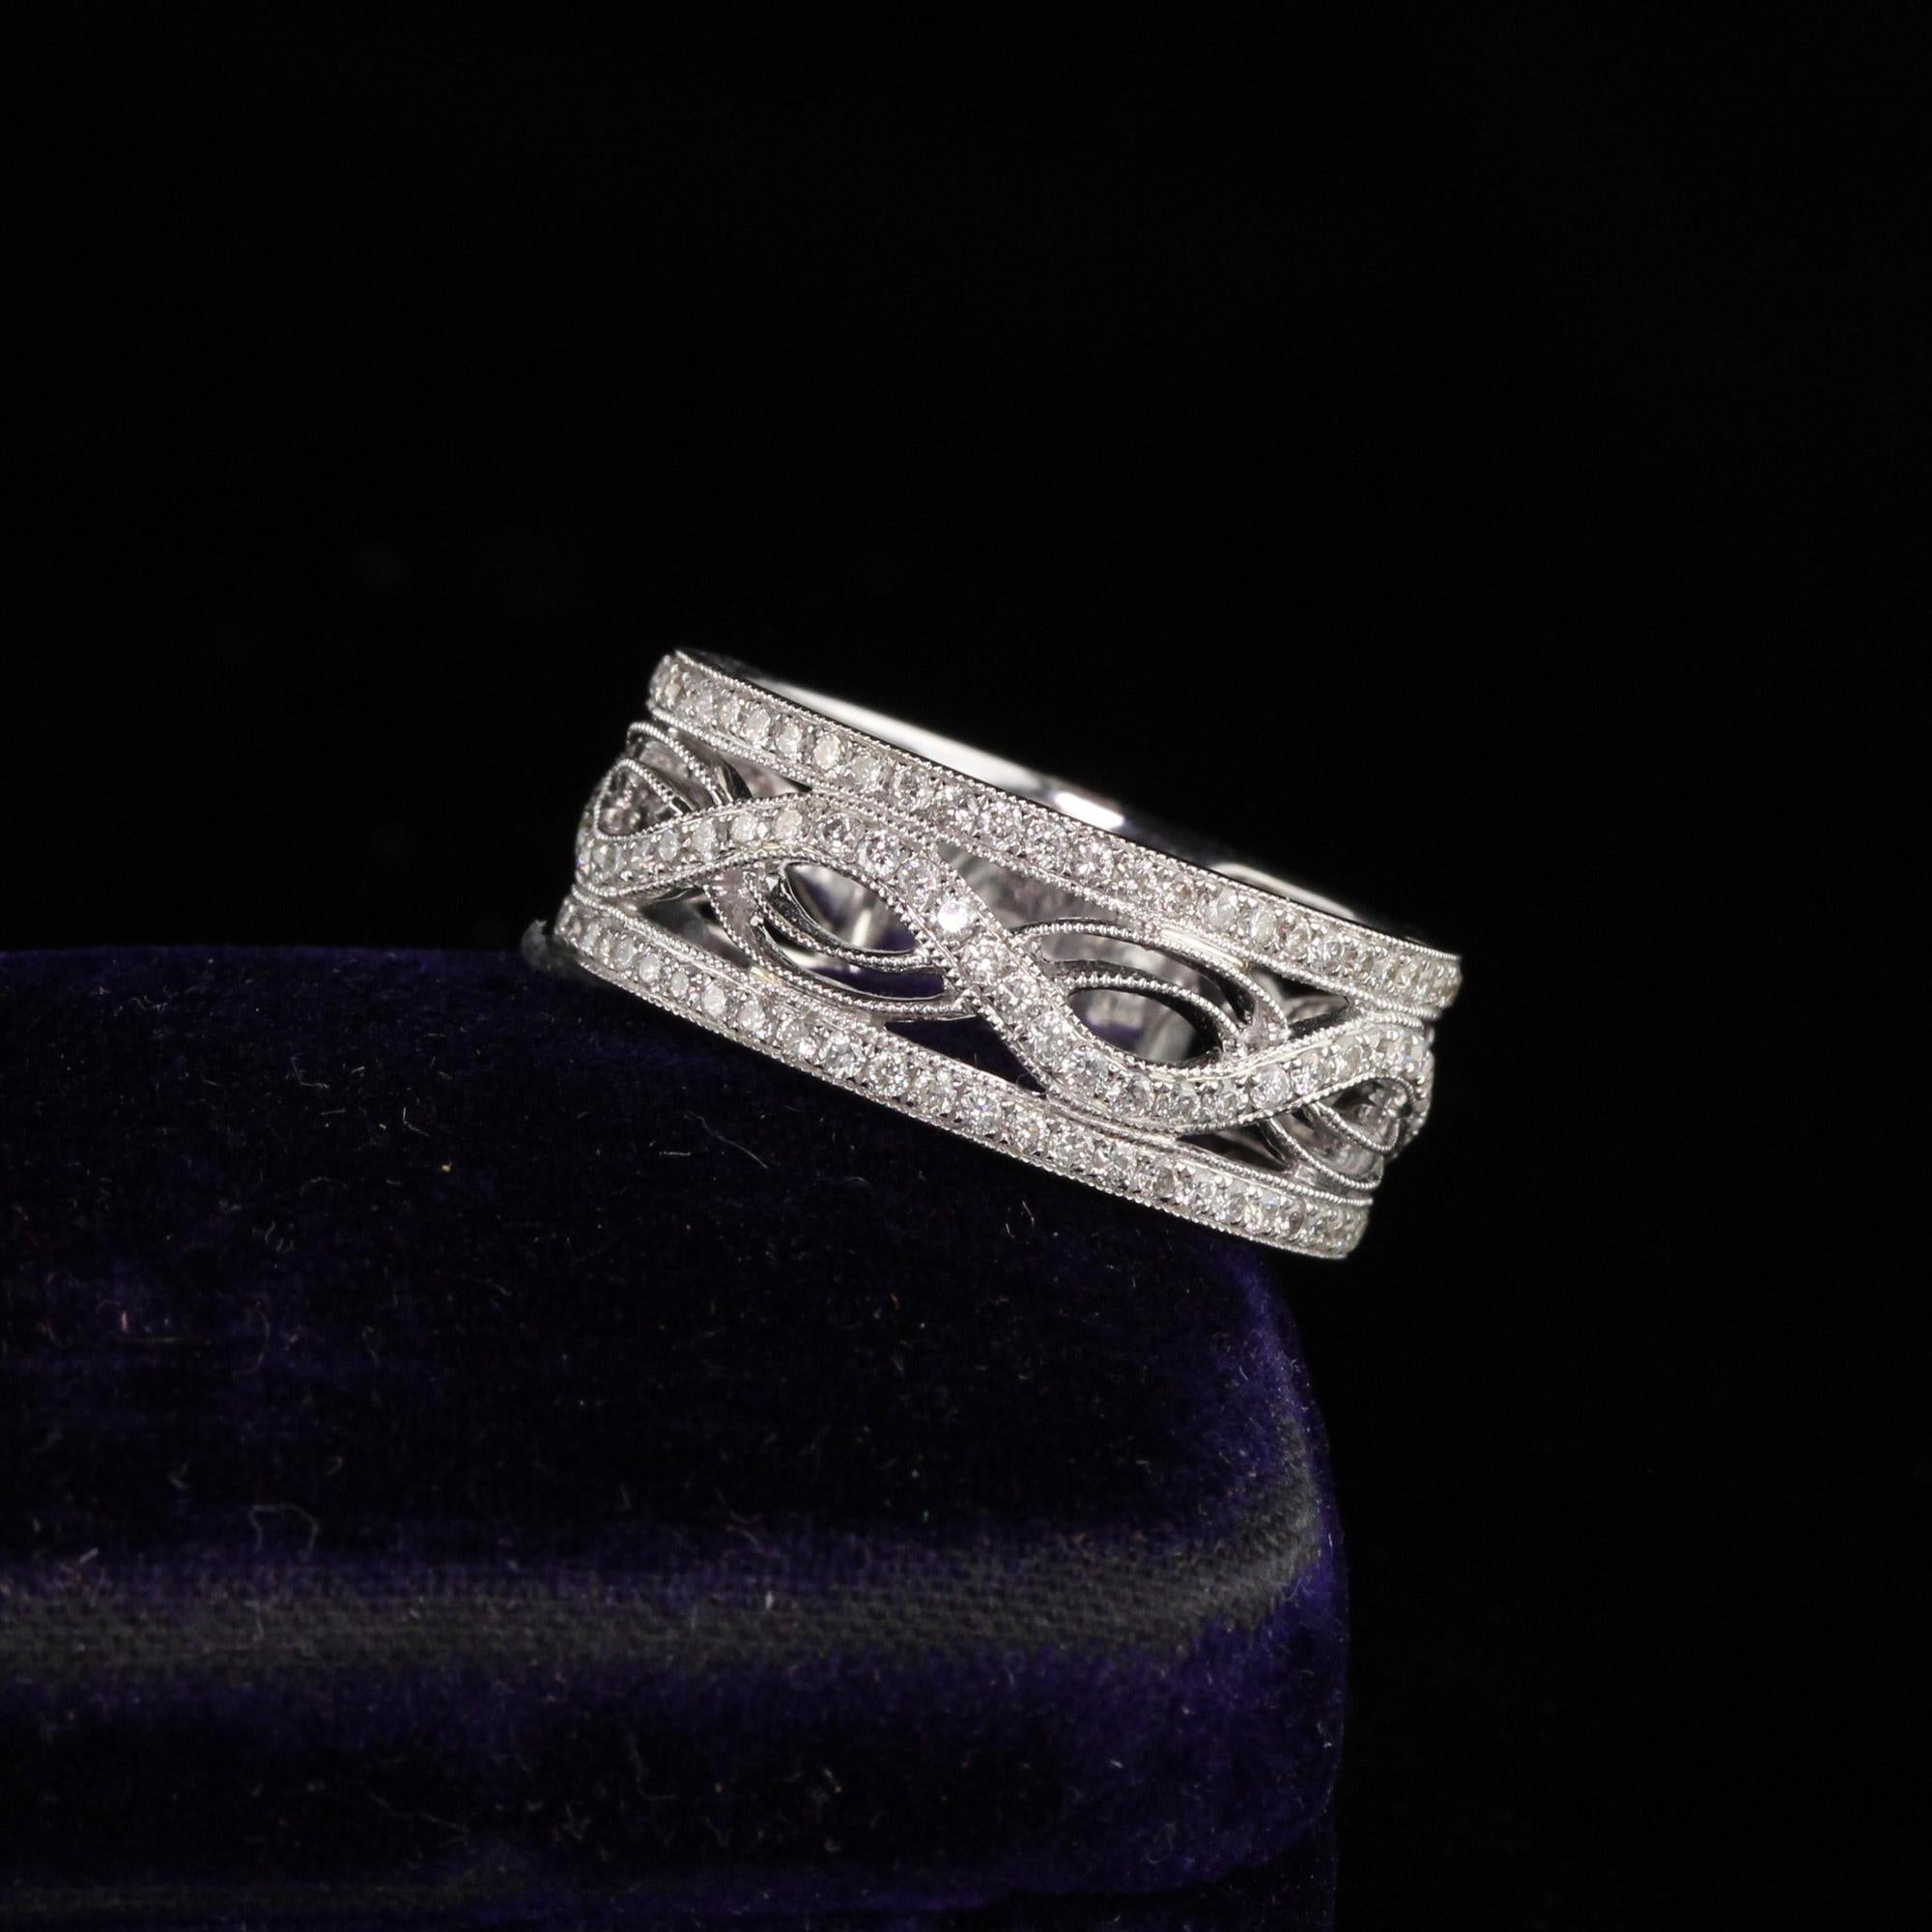 Elaborate white gold diamond band

Metal: White Gold

Weight: 6.4 Grams

Total Diamond Weight: Approximately 0.85 cts

Diamond Color: H

Diamond Clarity: SI1

Ring Size: 6.75 (sizable)

Measurements: 7.9 x 2.3 mm
